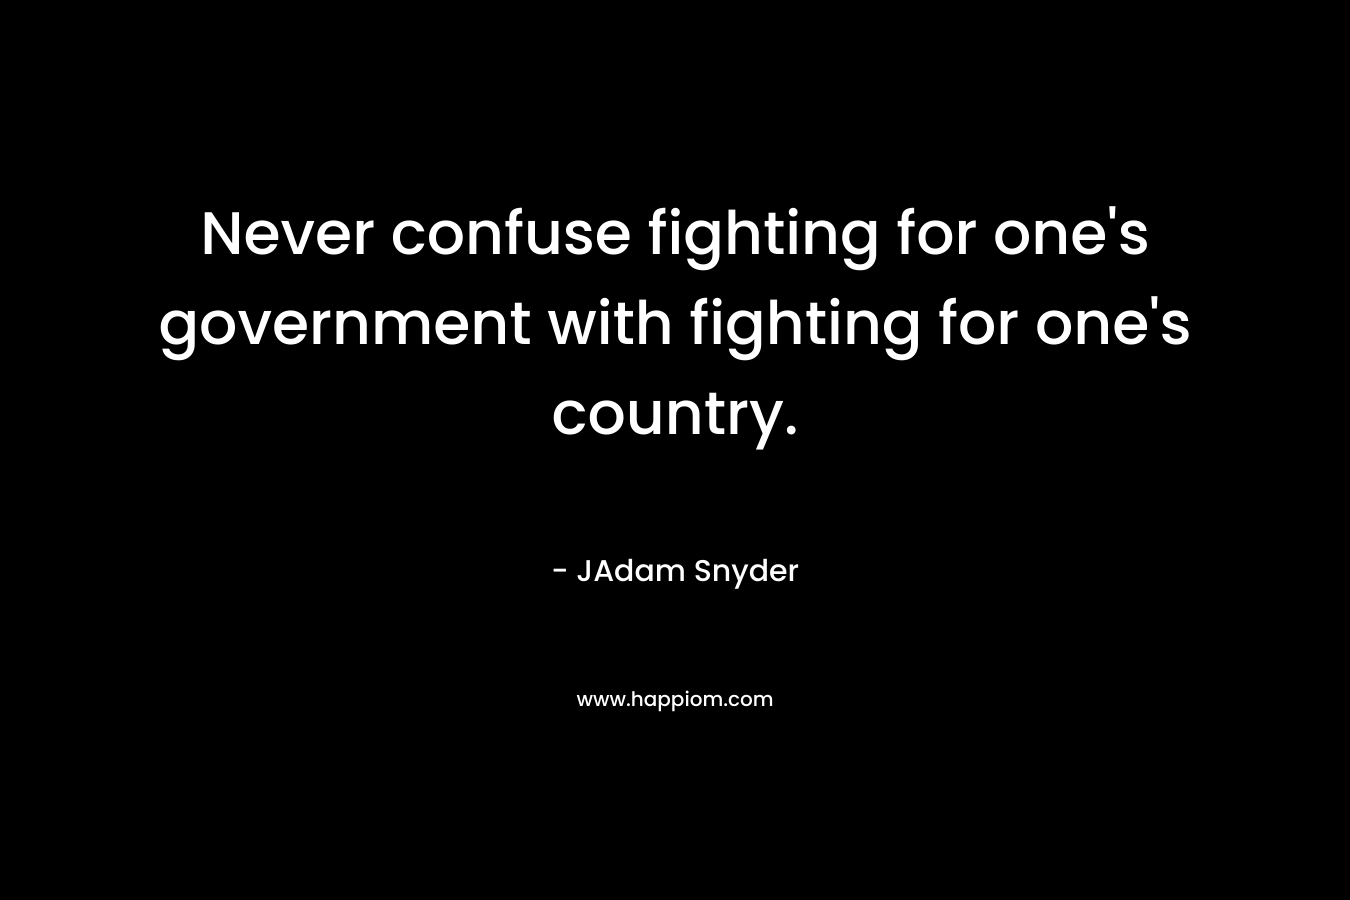 Never confuse fighting for one's government with fighting for one's country.